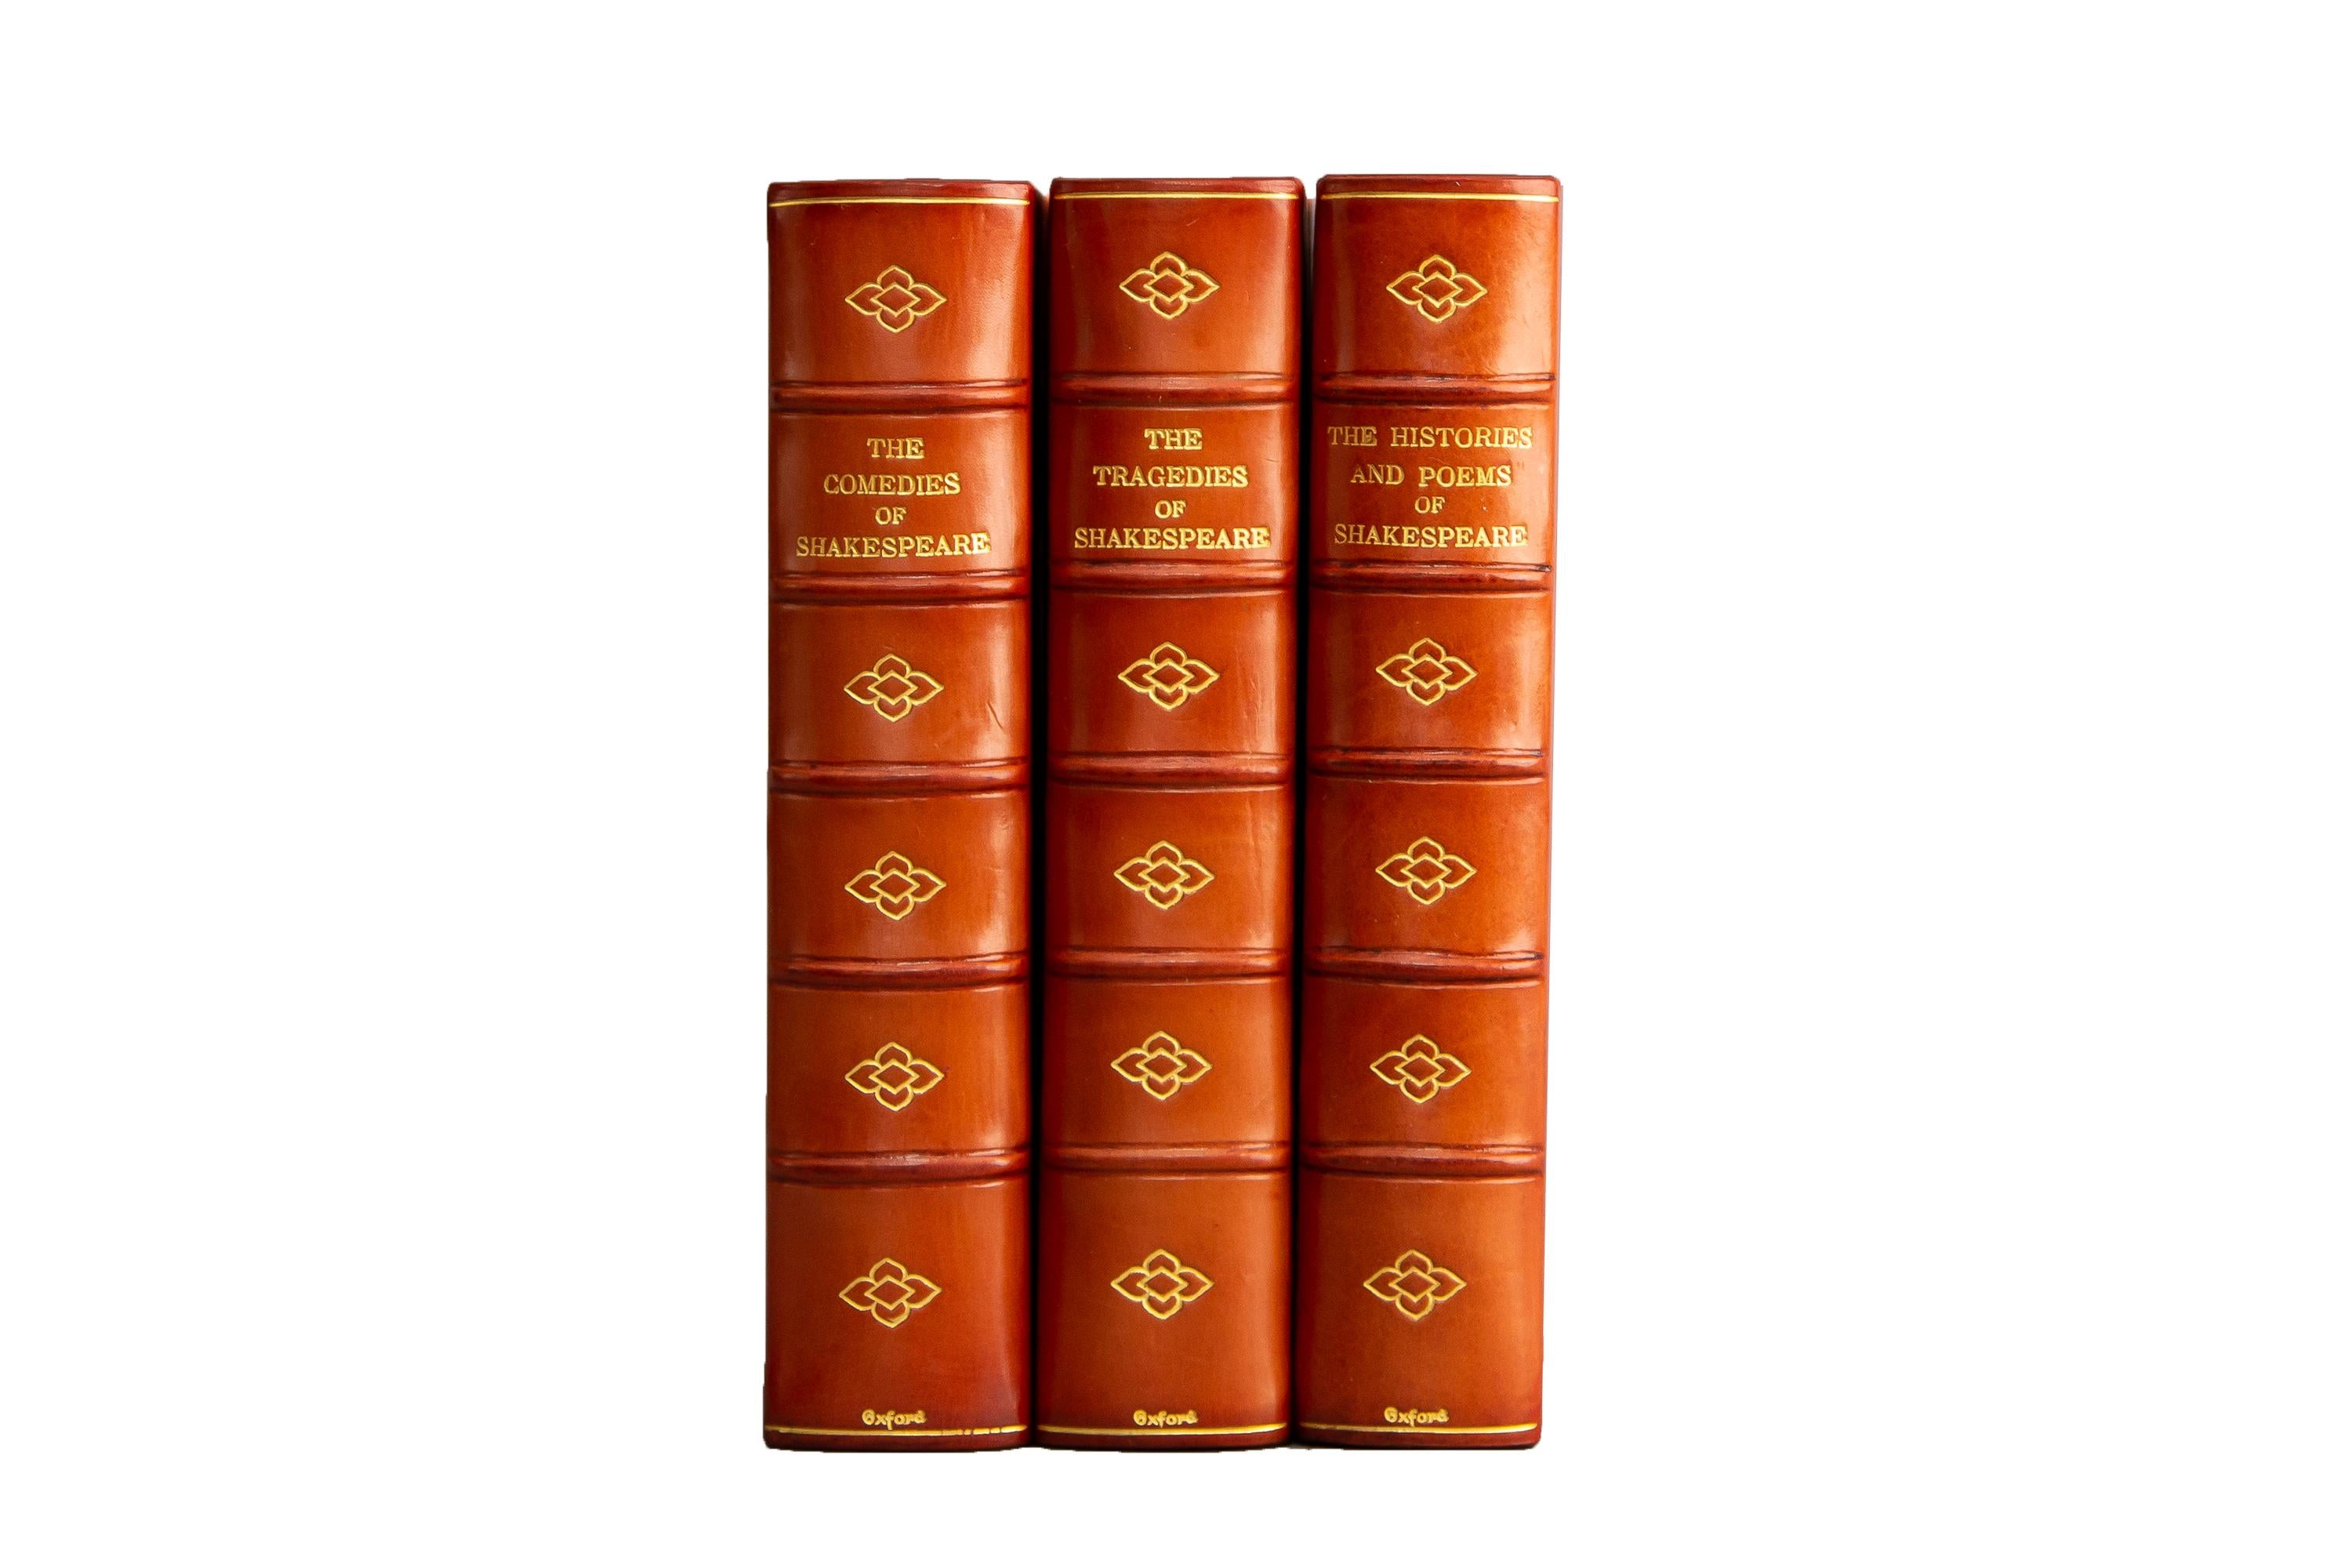 3 Volumes. William Shakespeare, The Works of Shakespeare.